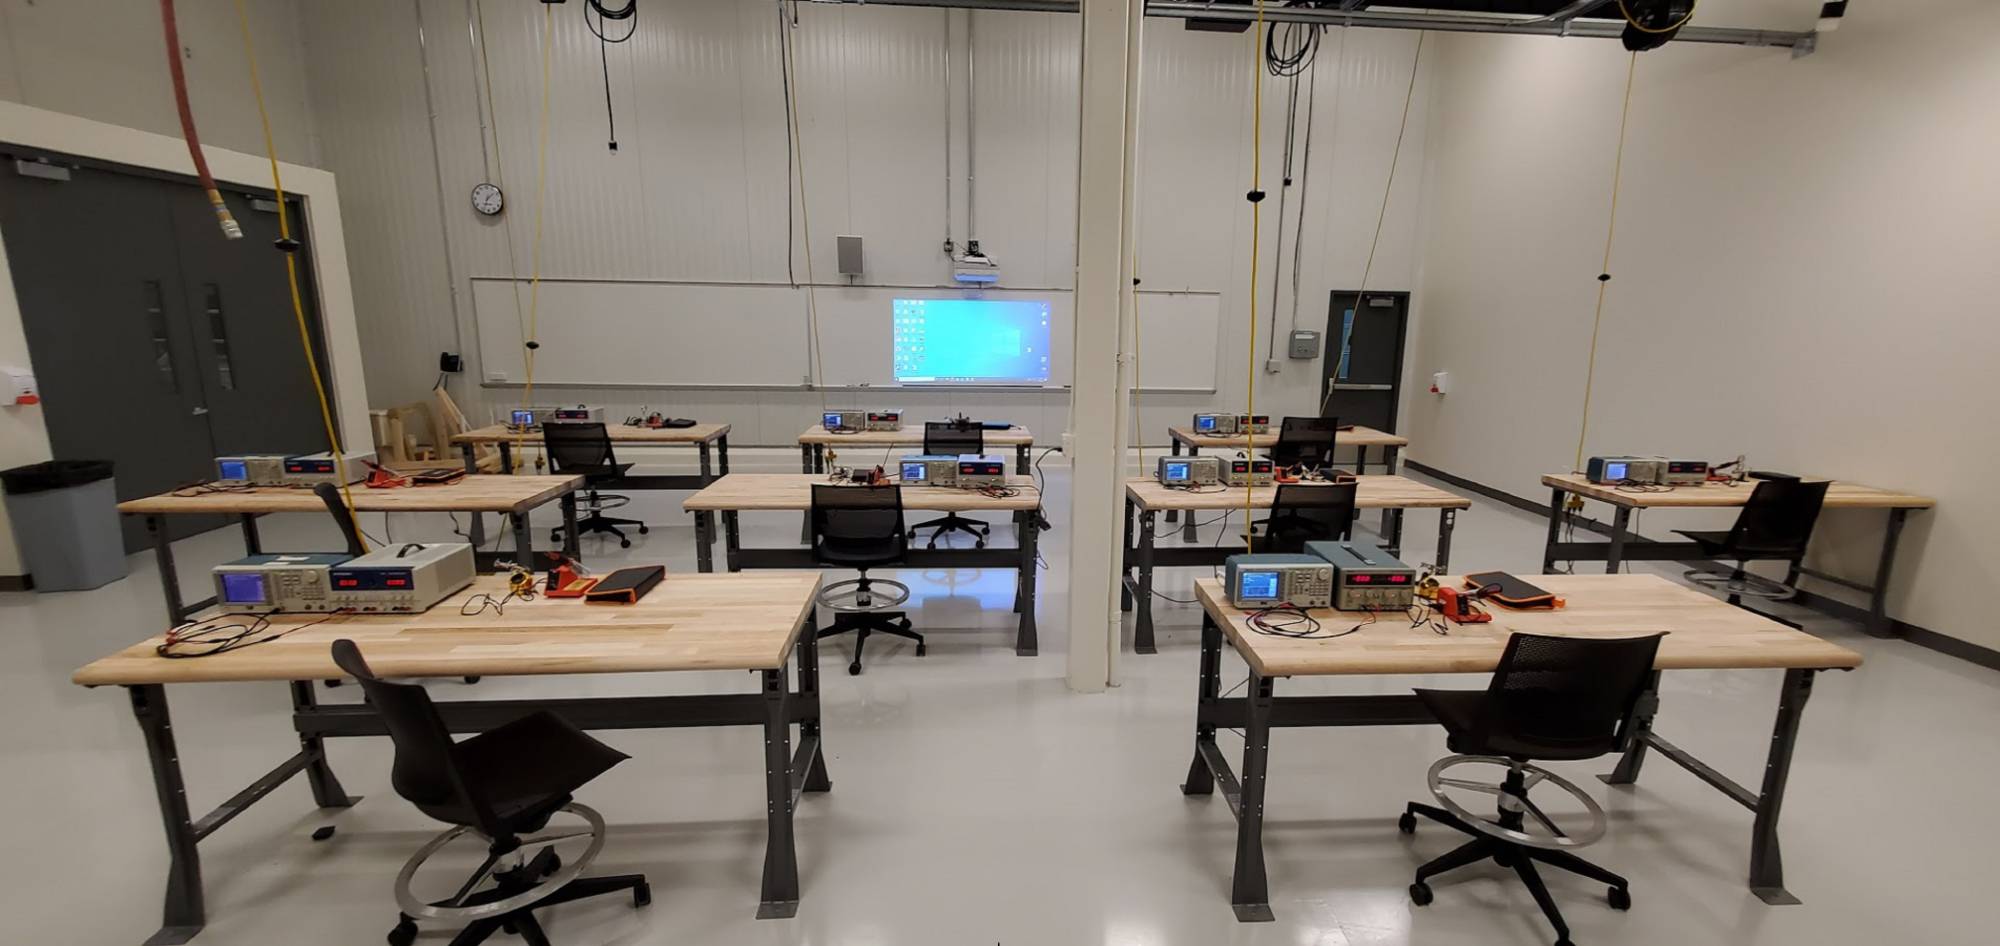 Soldering stations set up in the graduate project lab